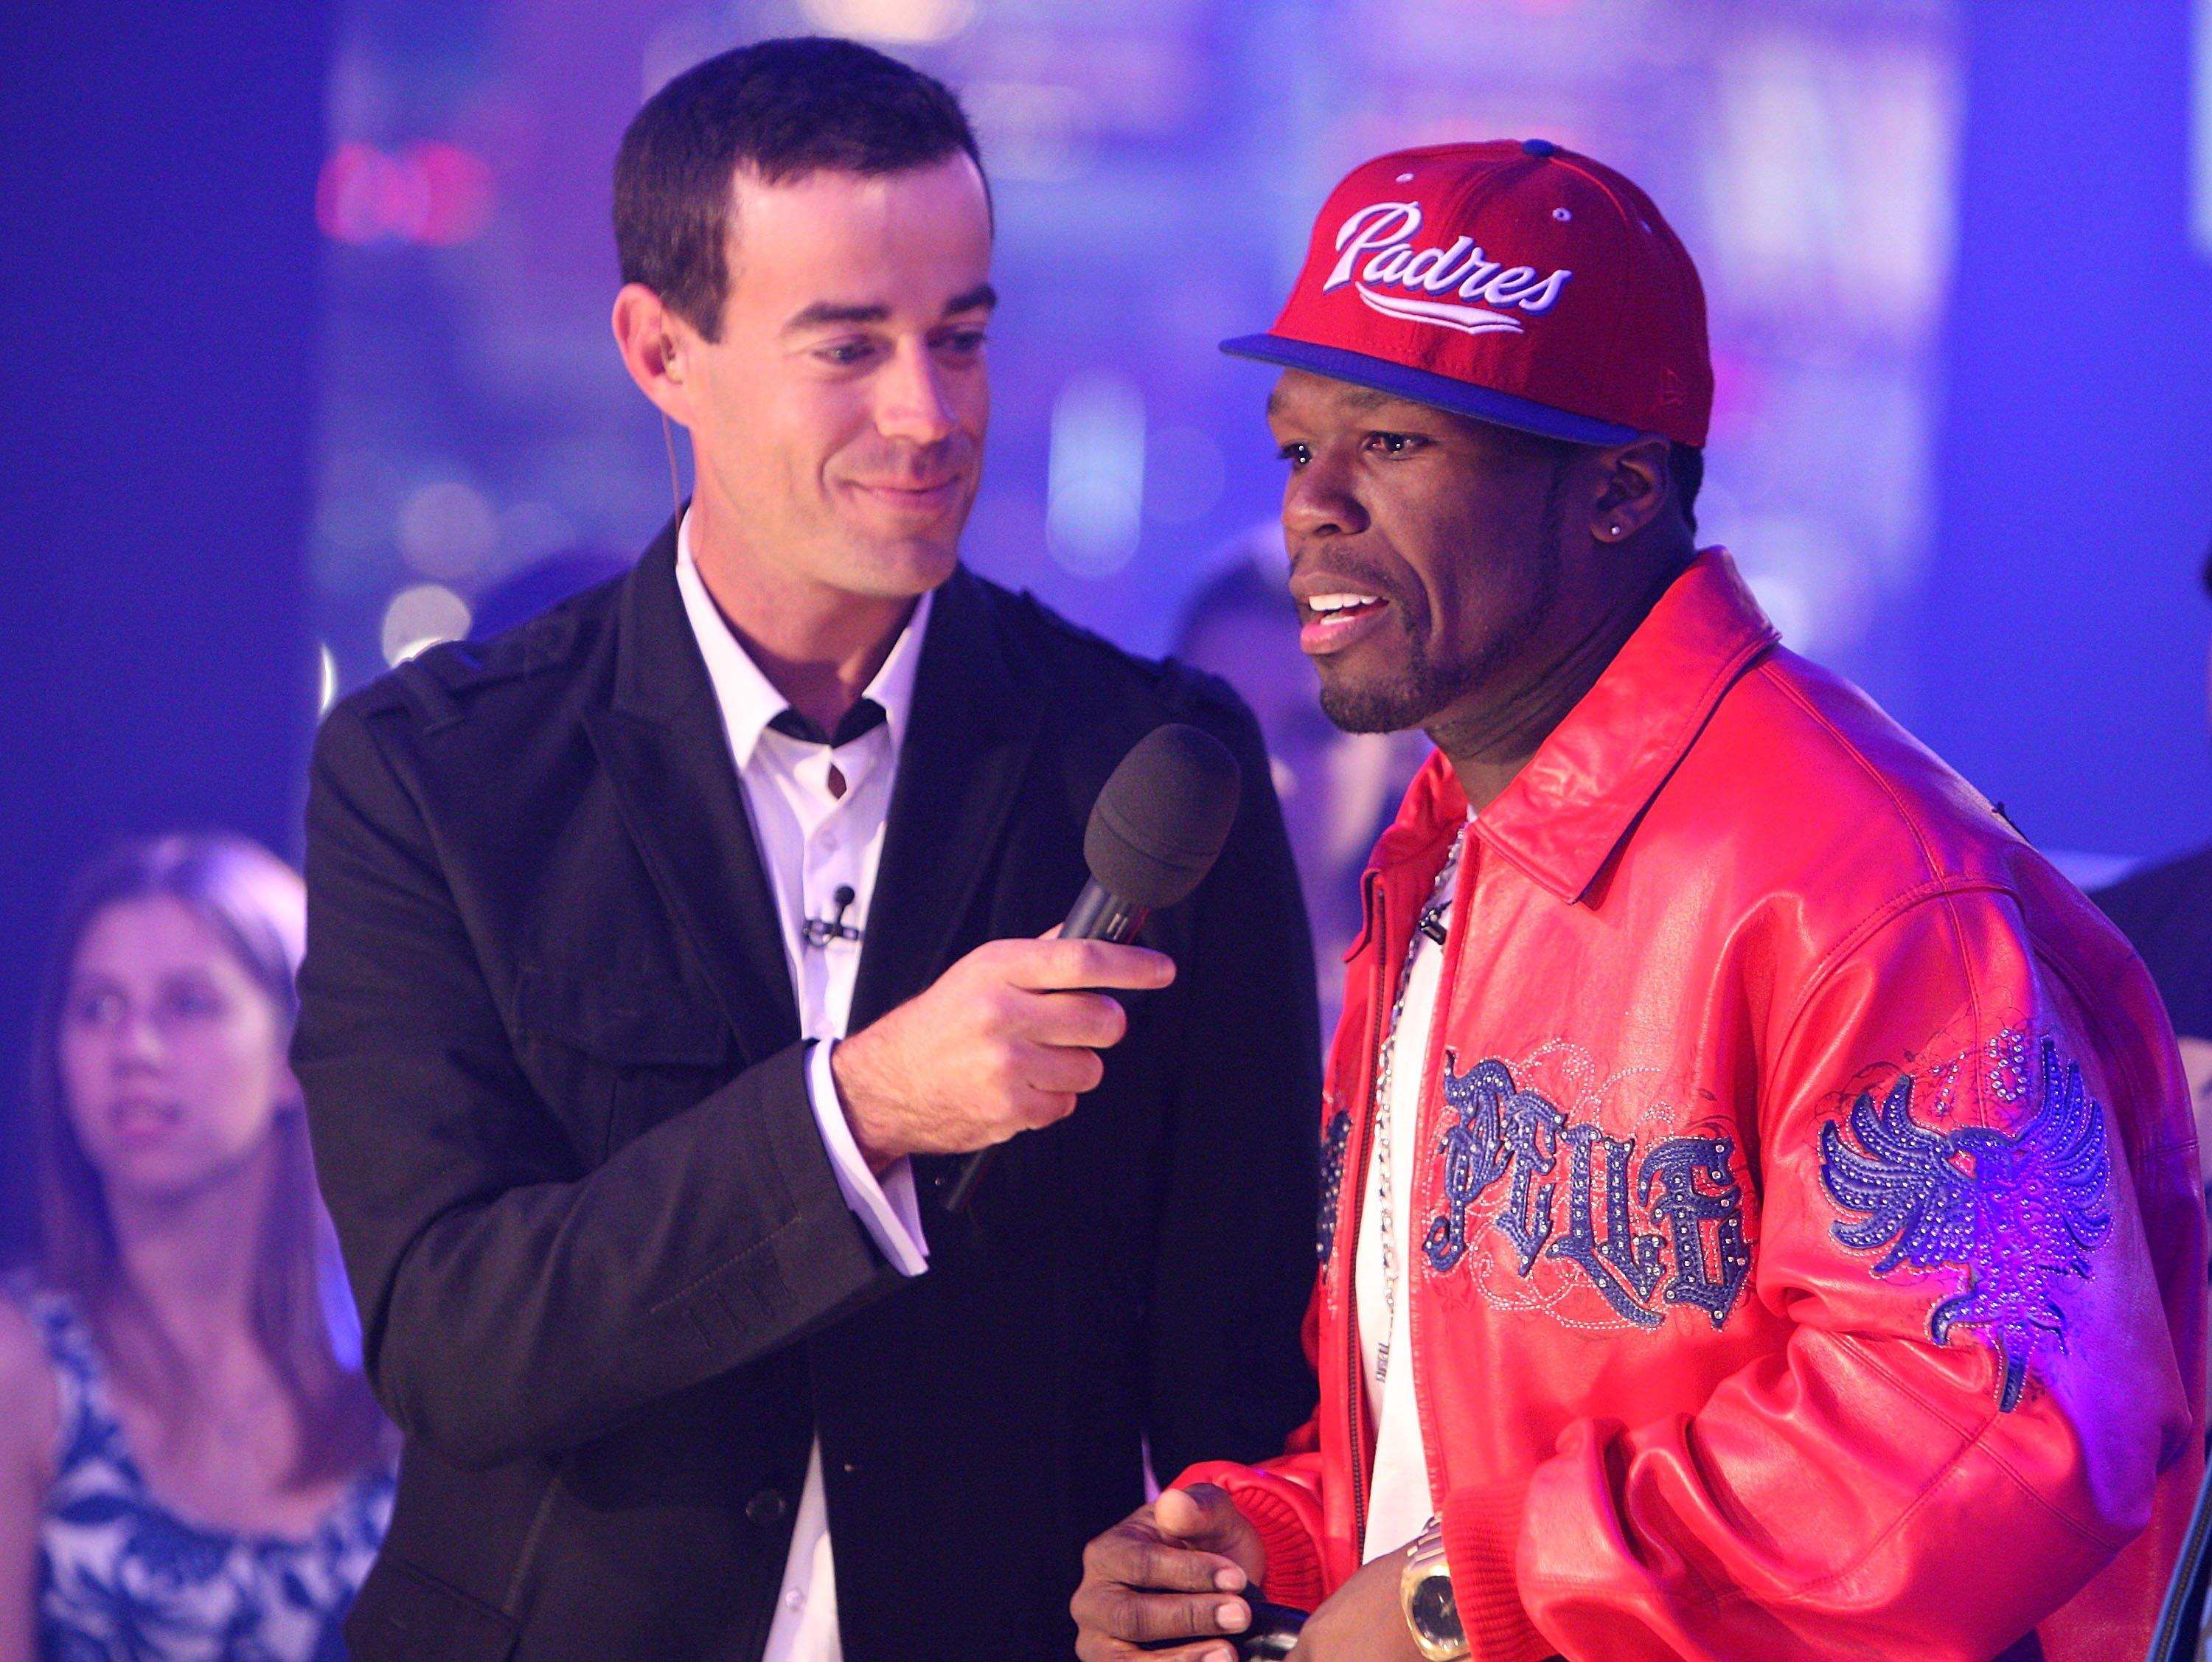 Carson Daly and 50 Cent on "TRL" set in 2008